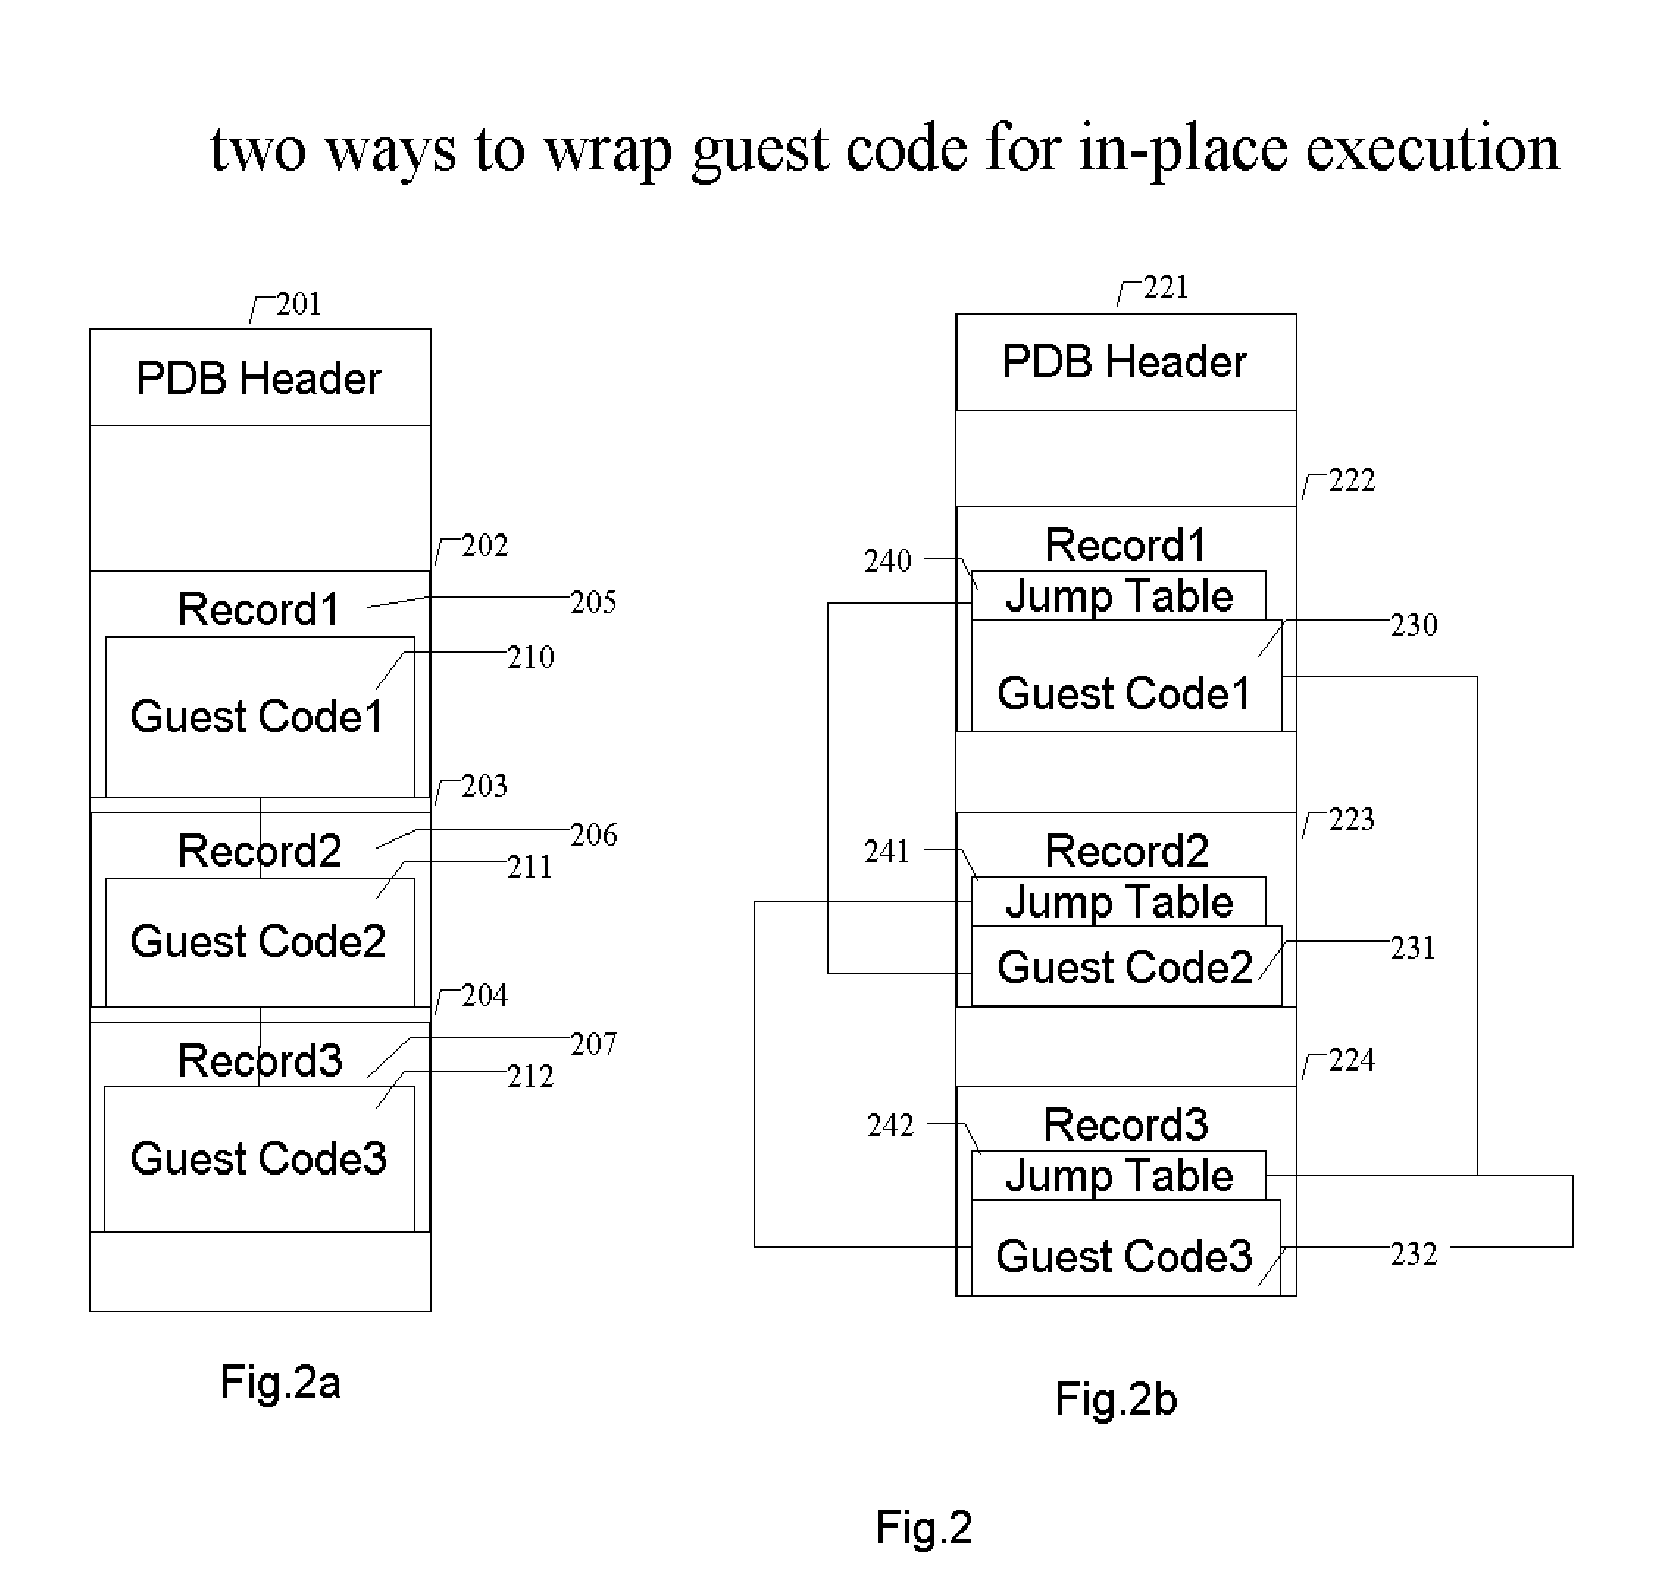 Methods and systems for running multiple operating systems in a single mobile device